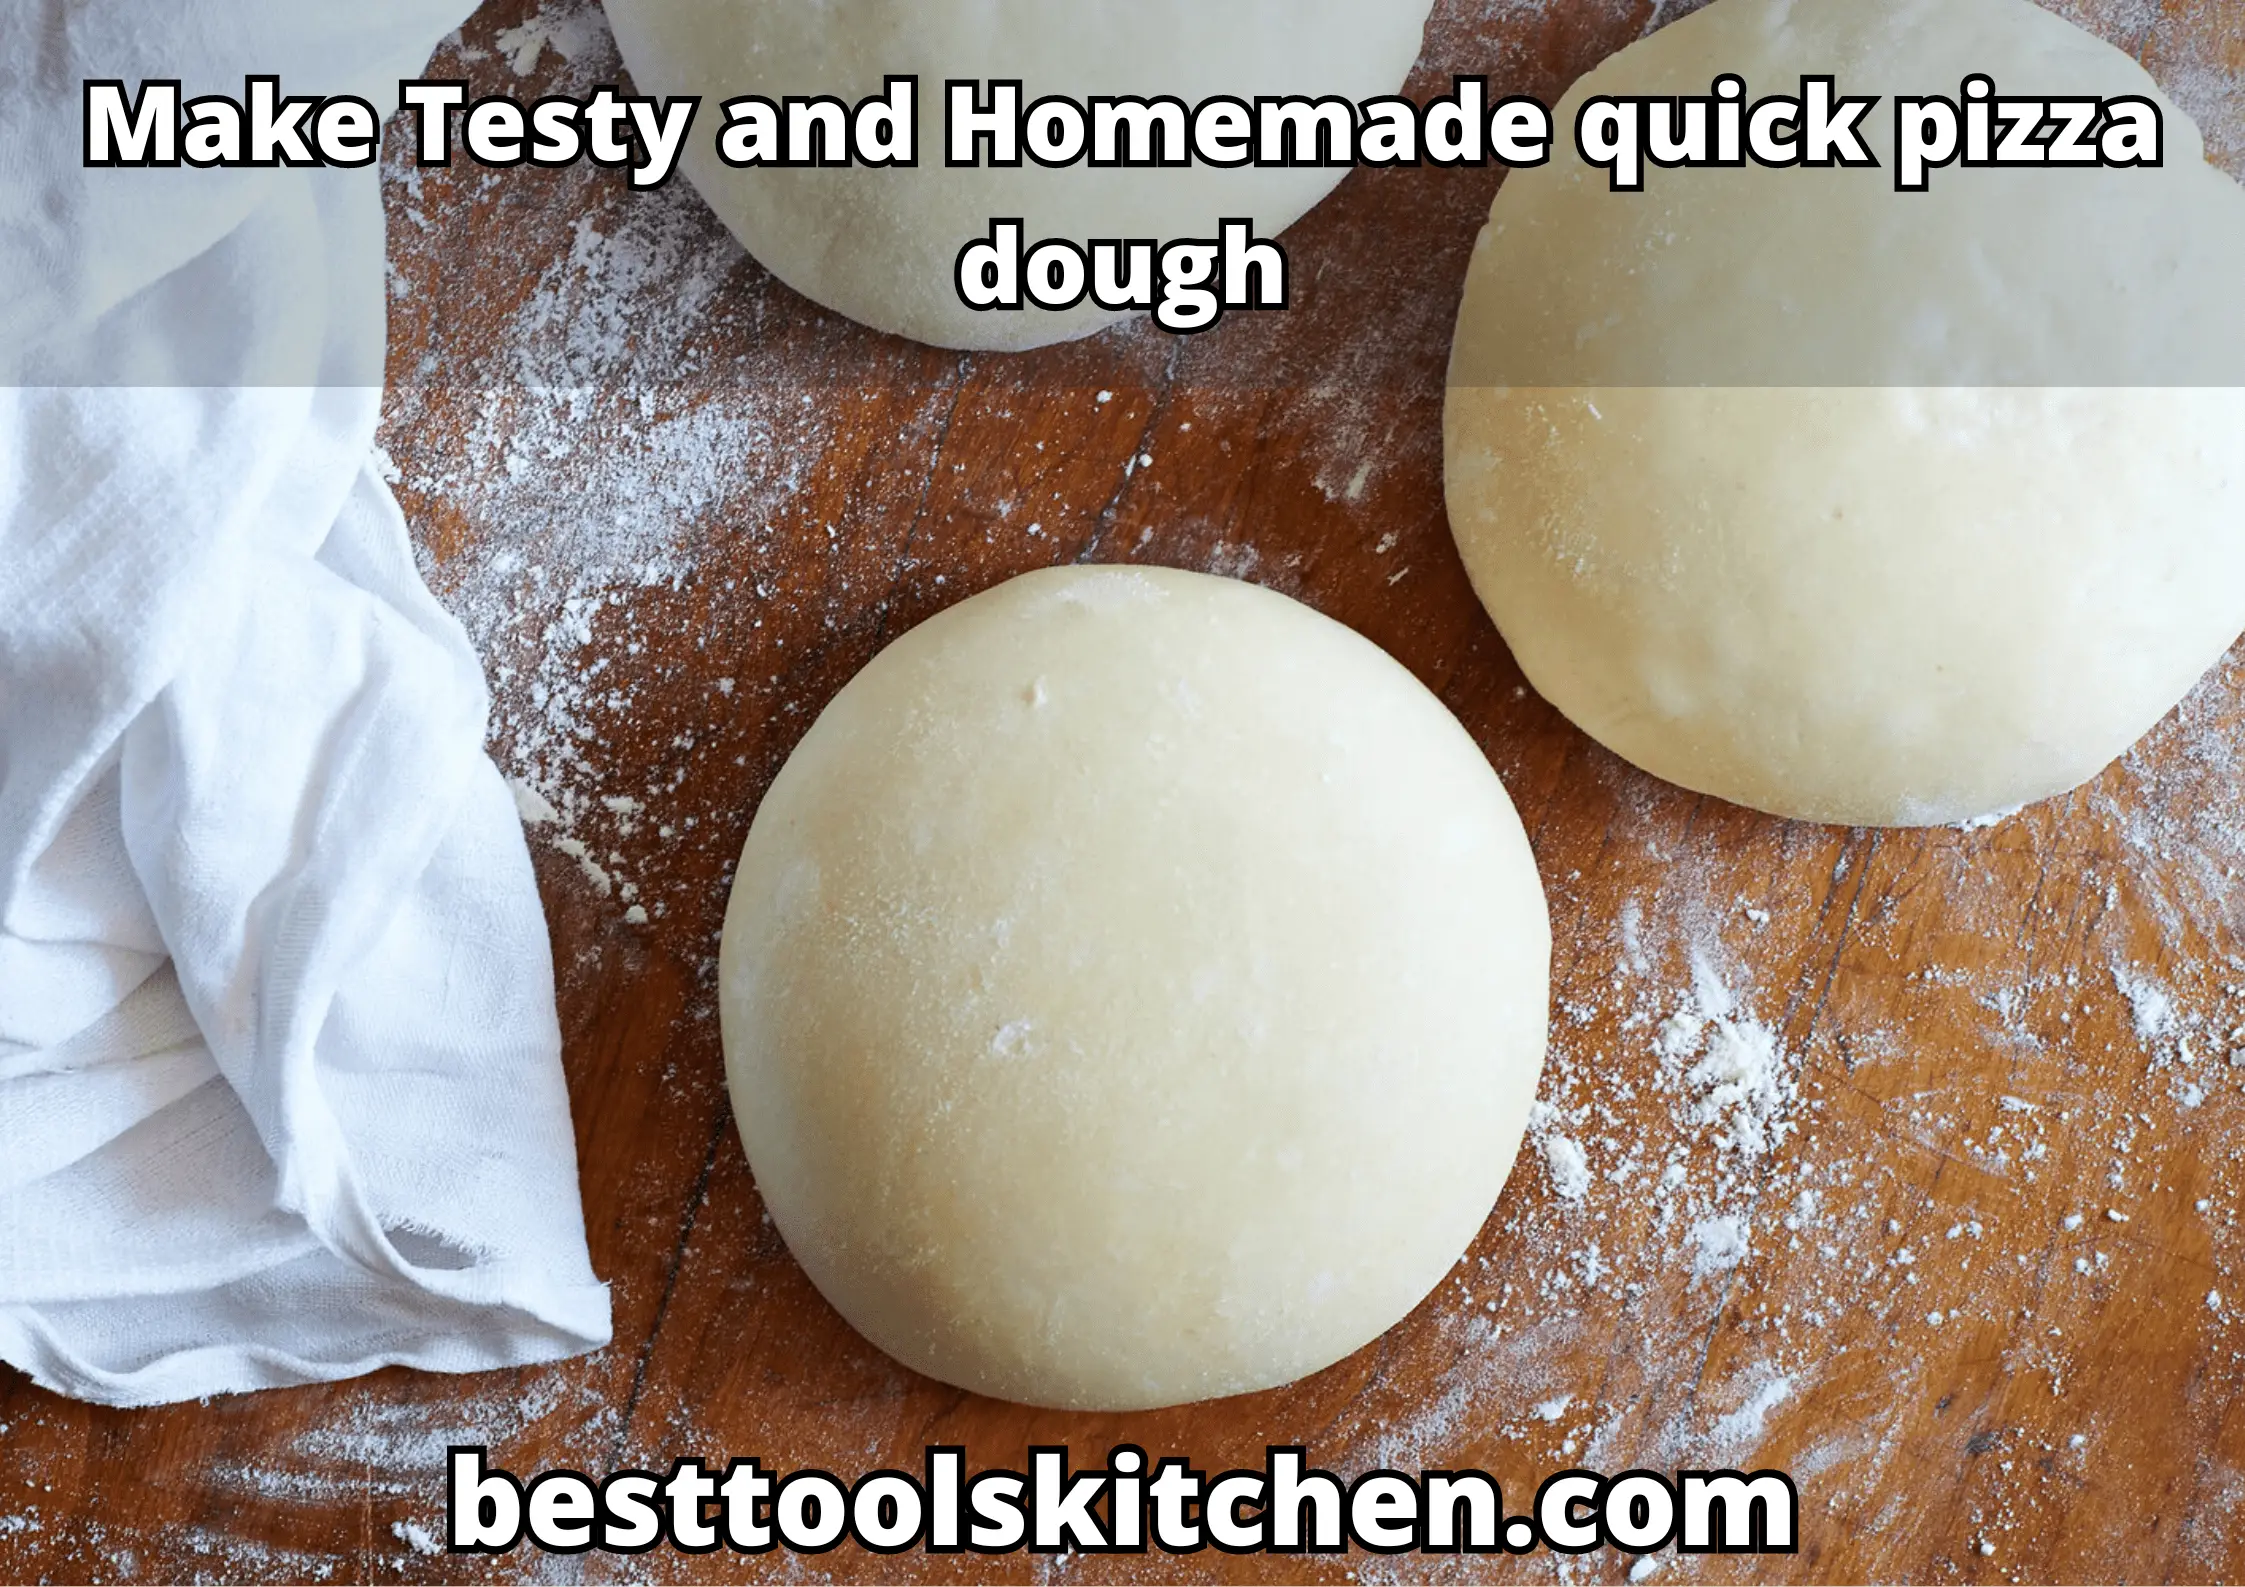 Mastering Homemade Quick Pizza Dough: 7 Easy Steps